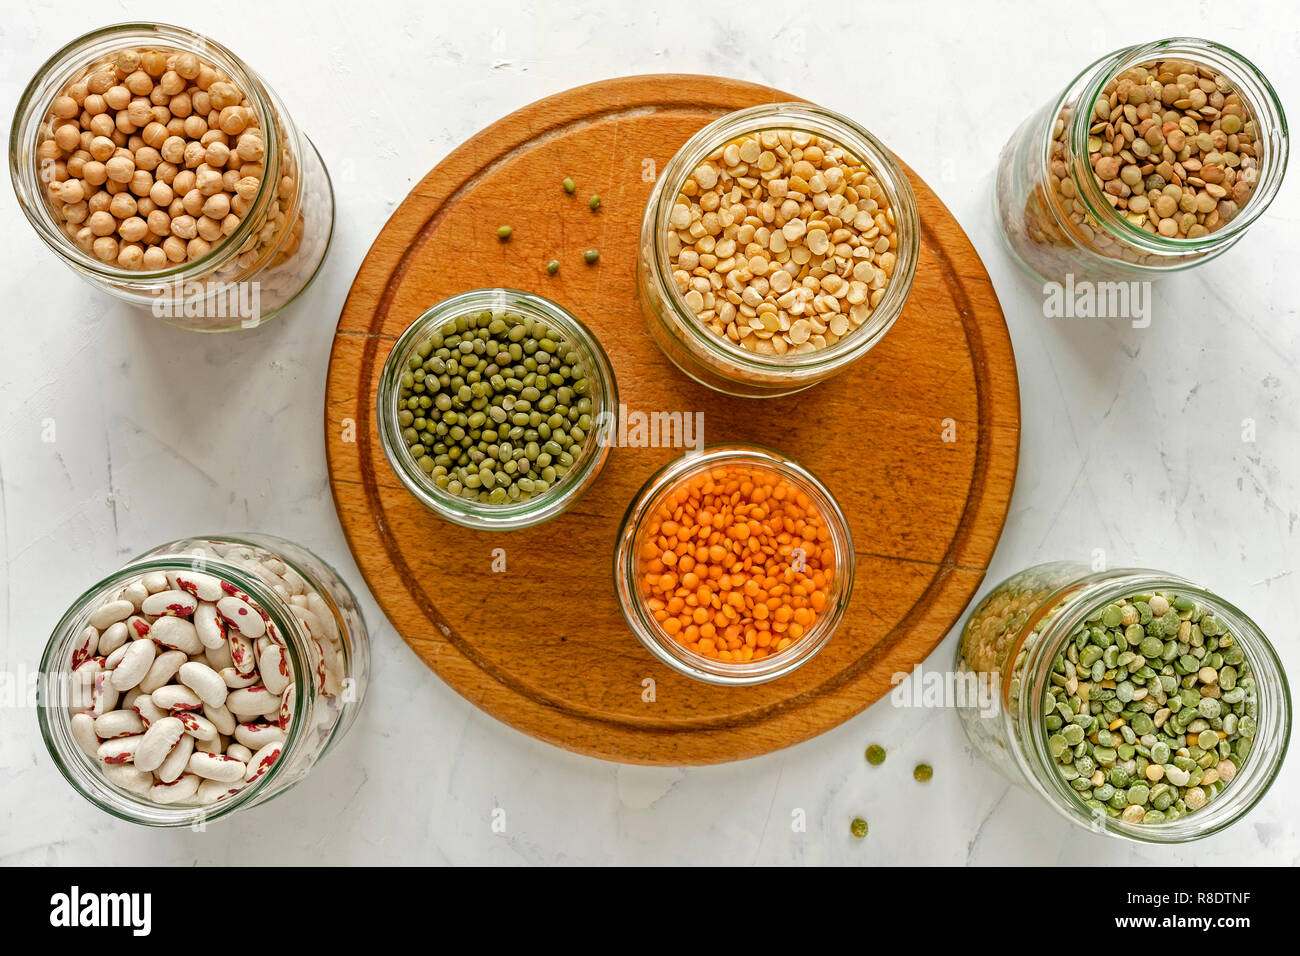 Assorted dry legumes and pulses in glass jars around a circular wooden board on white viewed from overhead in a healthy diet concept Stock Photo